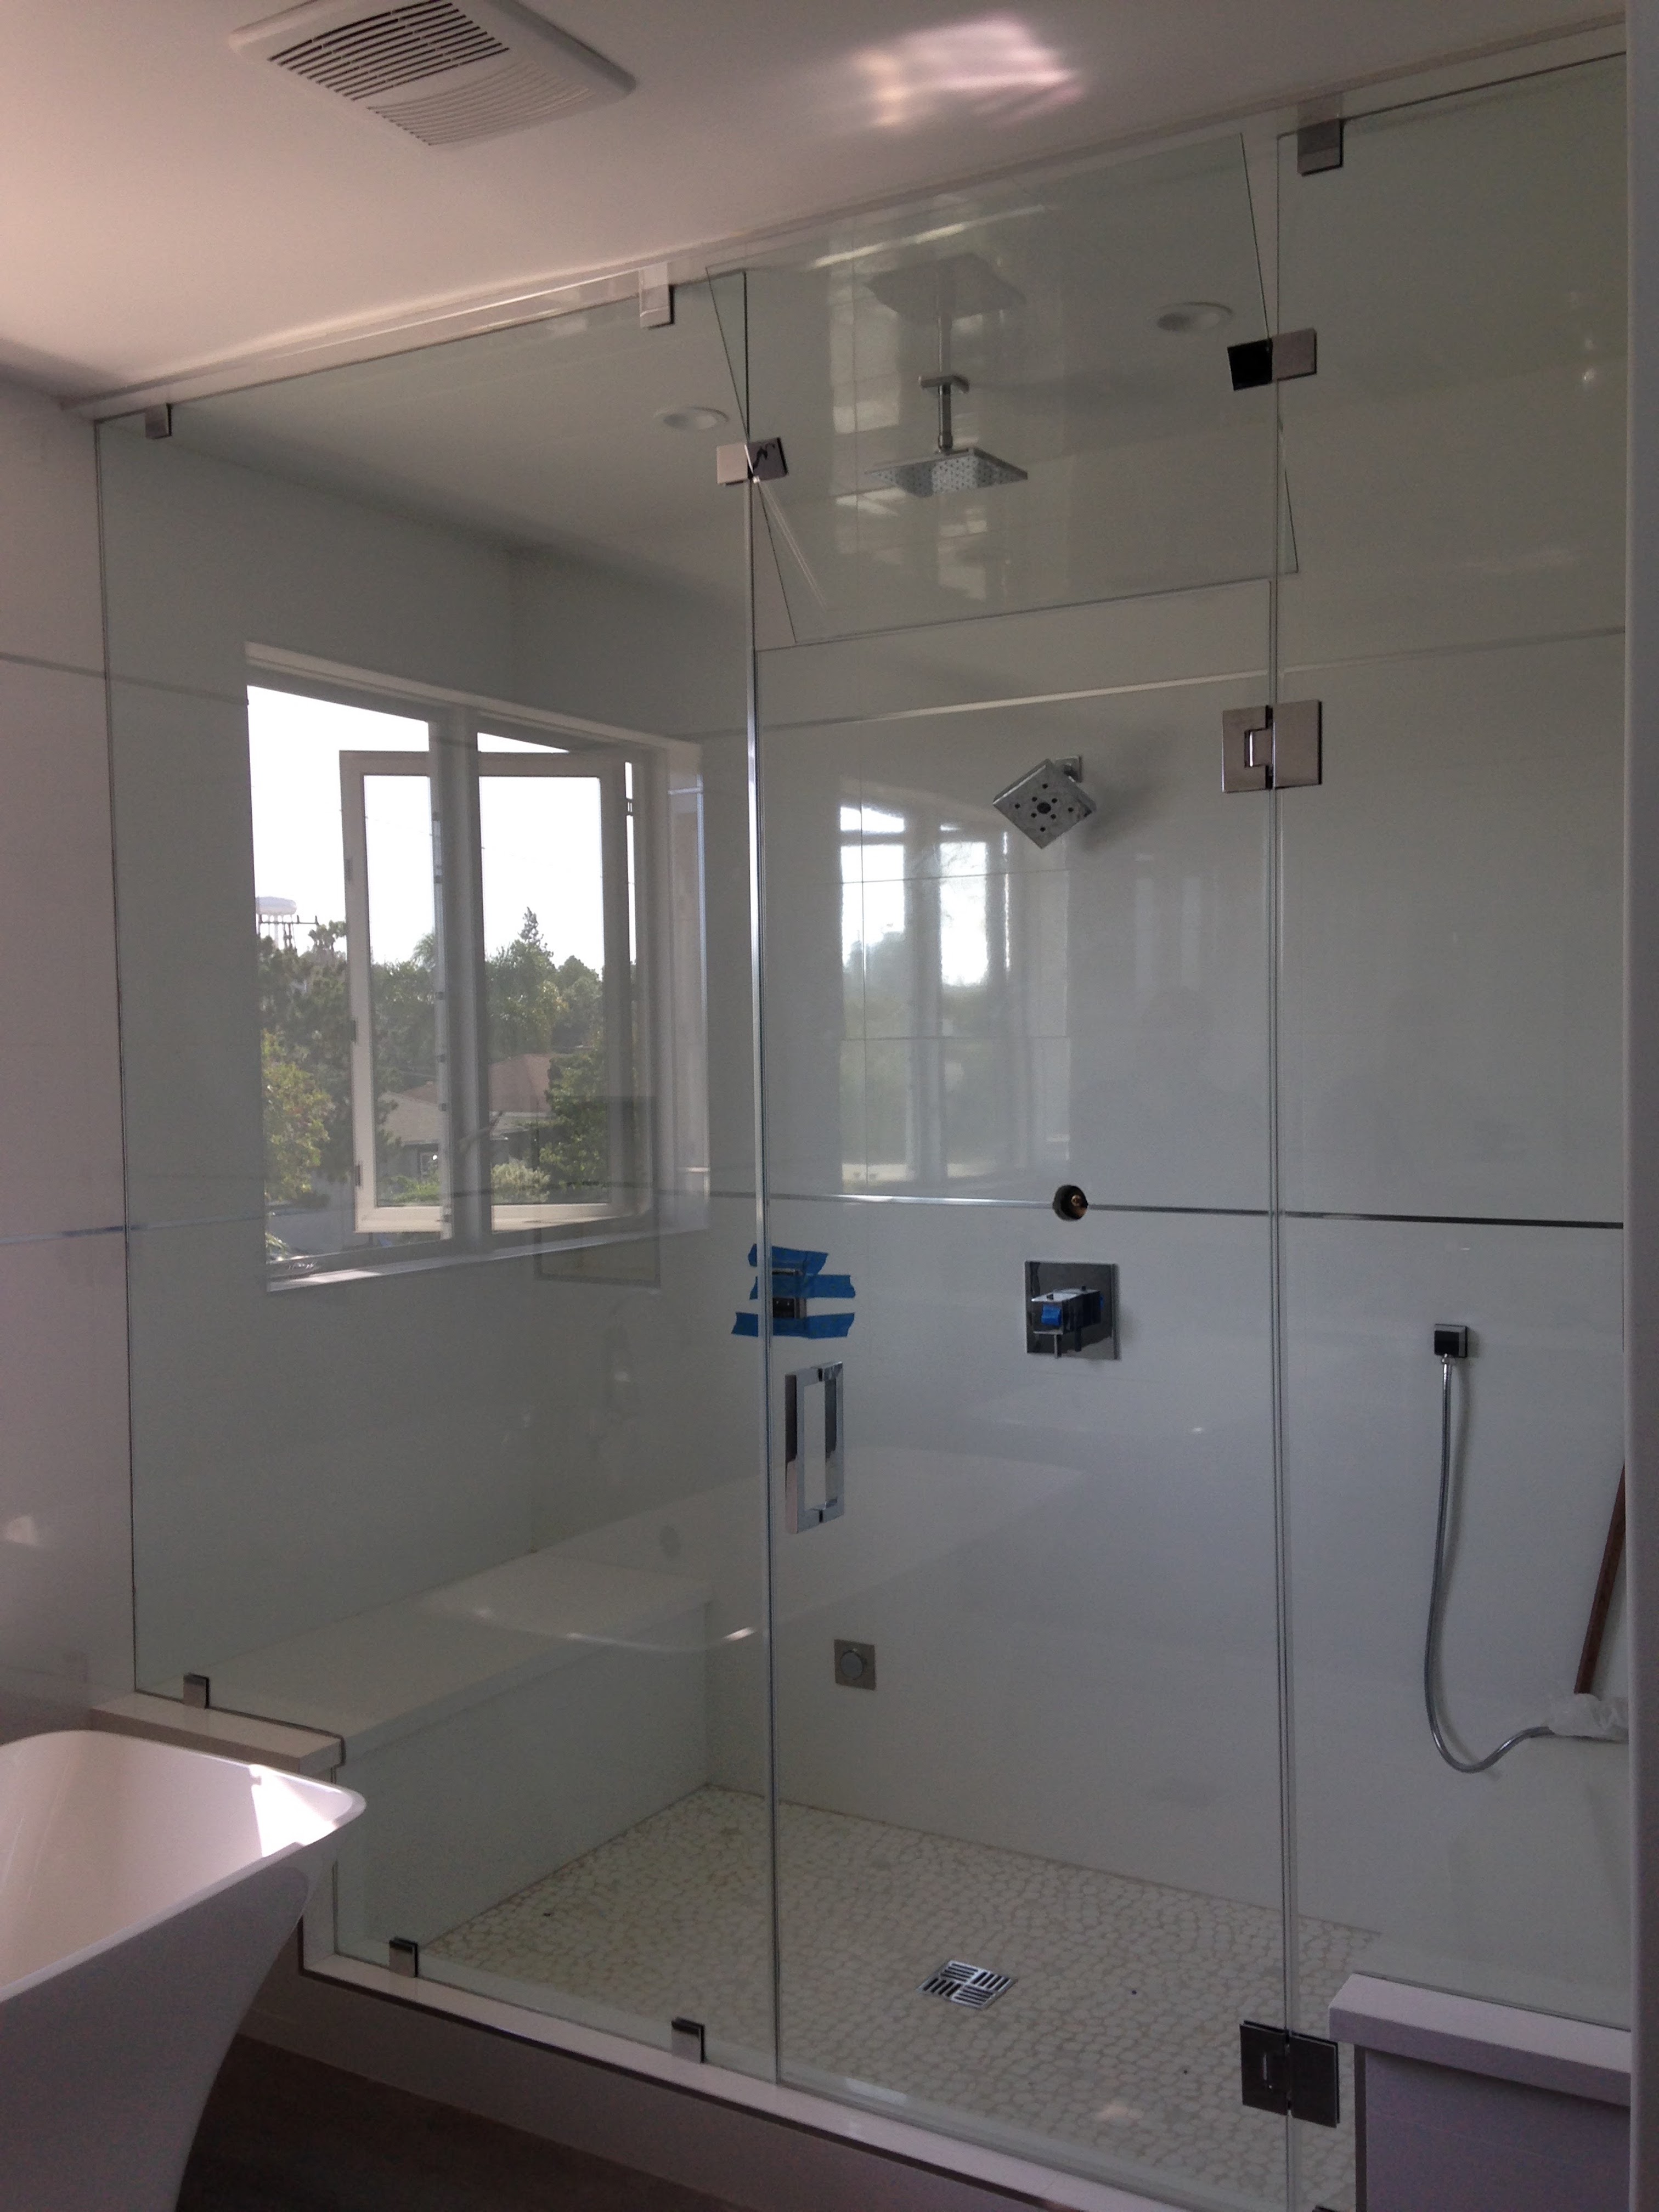 Custom shower door with three glass panels and a vent option